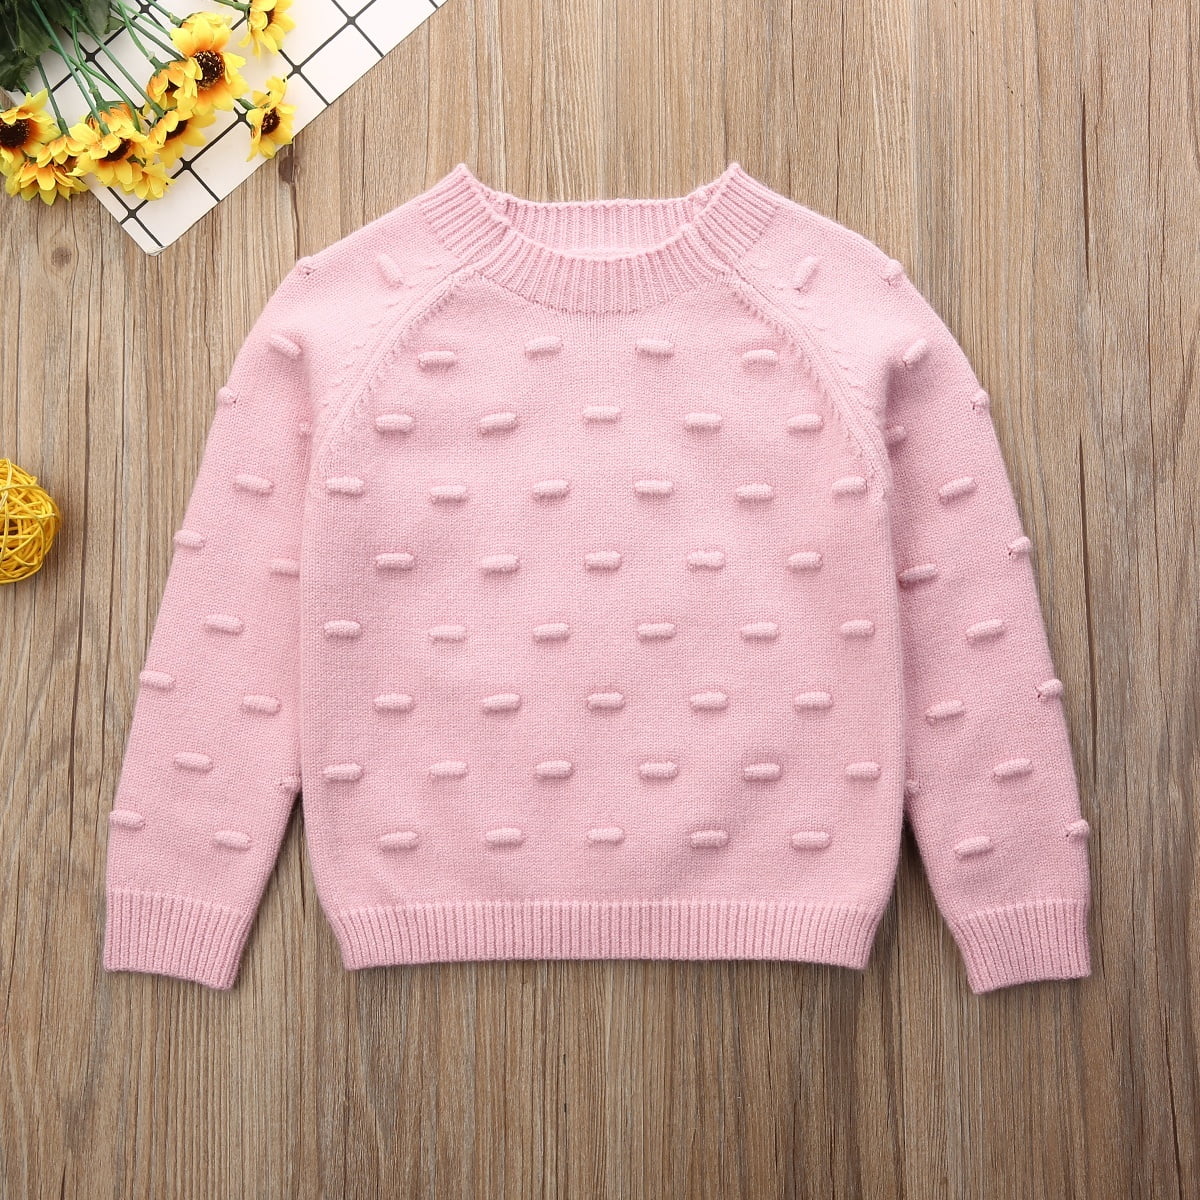 FREEFLY Kids Baby Girls Long Sleeve Sweater Floral Warm Pullover Tops T-Shirt Blouse for 1-6 Years